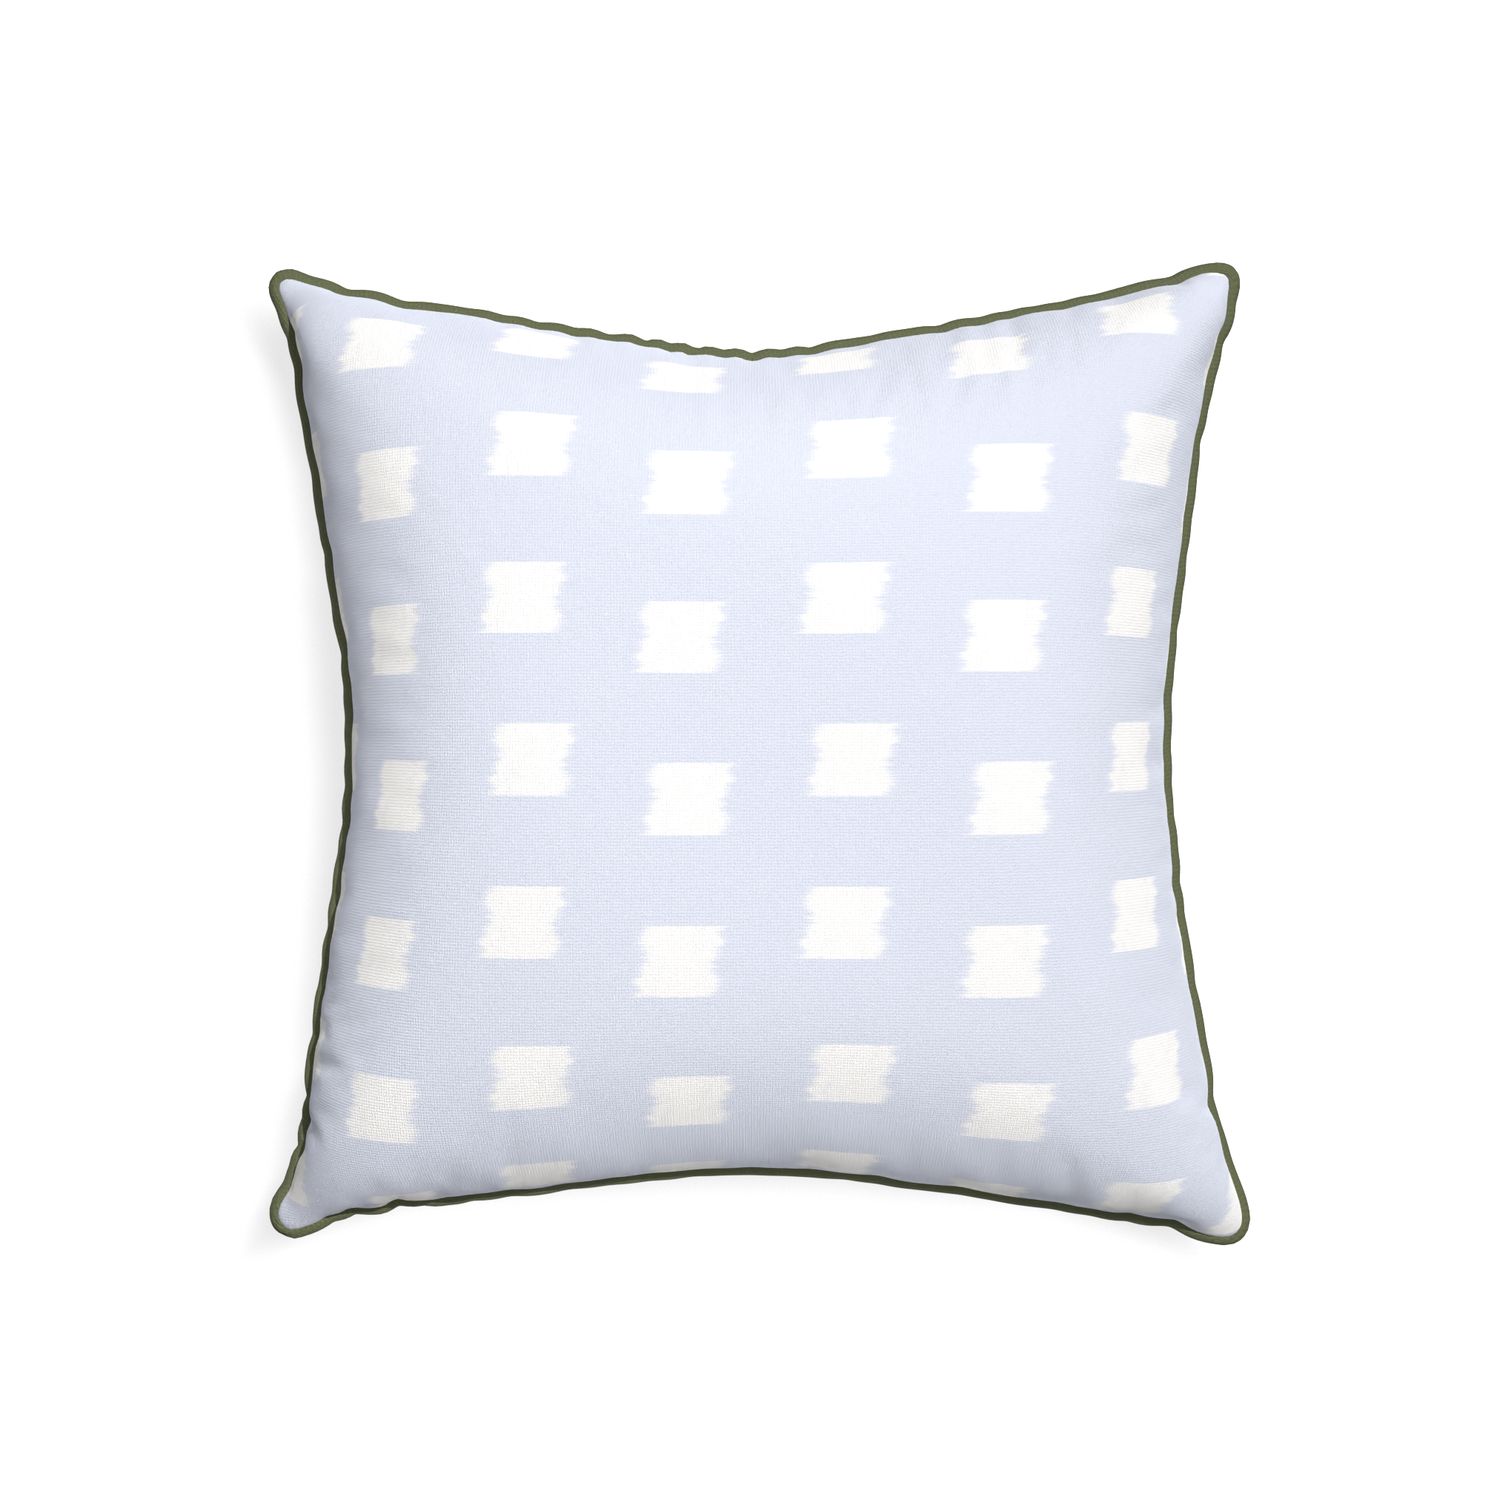 22-square denton custom pillow with f piping on white background